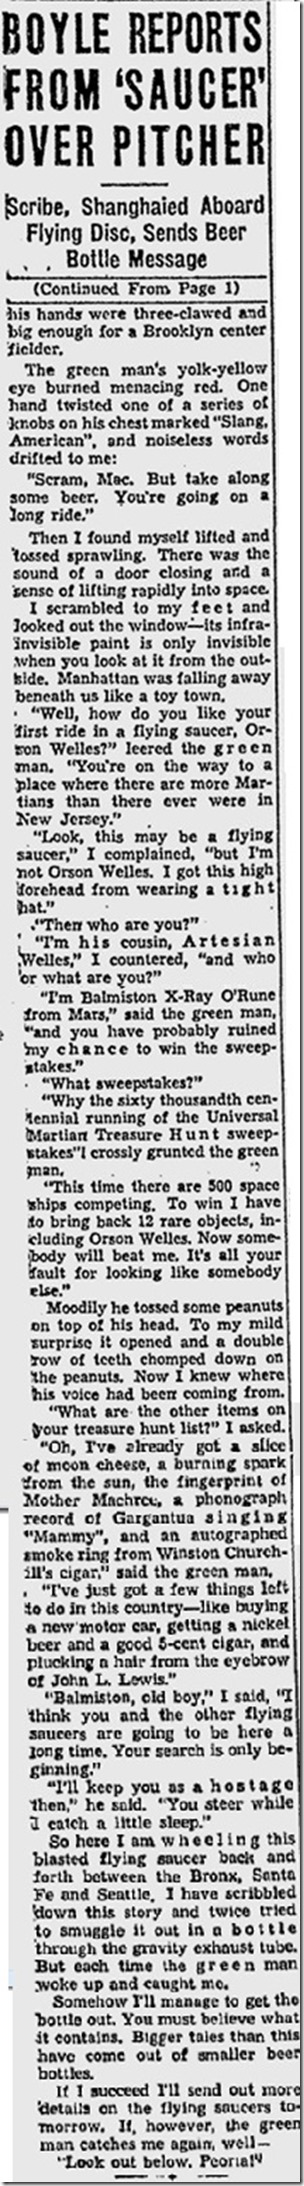 ThePortsmouthTimes-Portsmouth-8-7-1947c